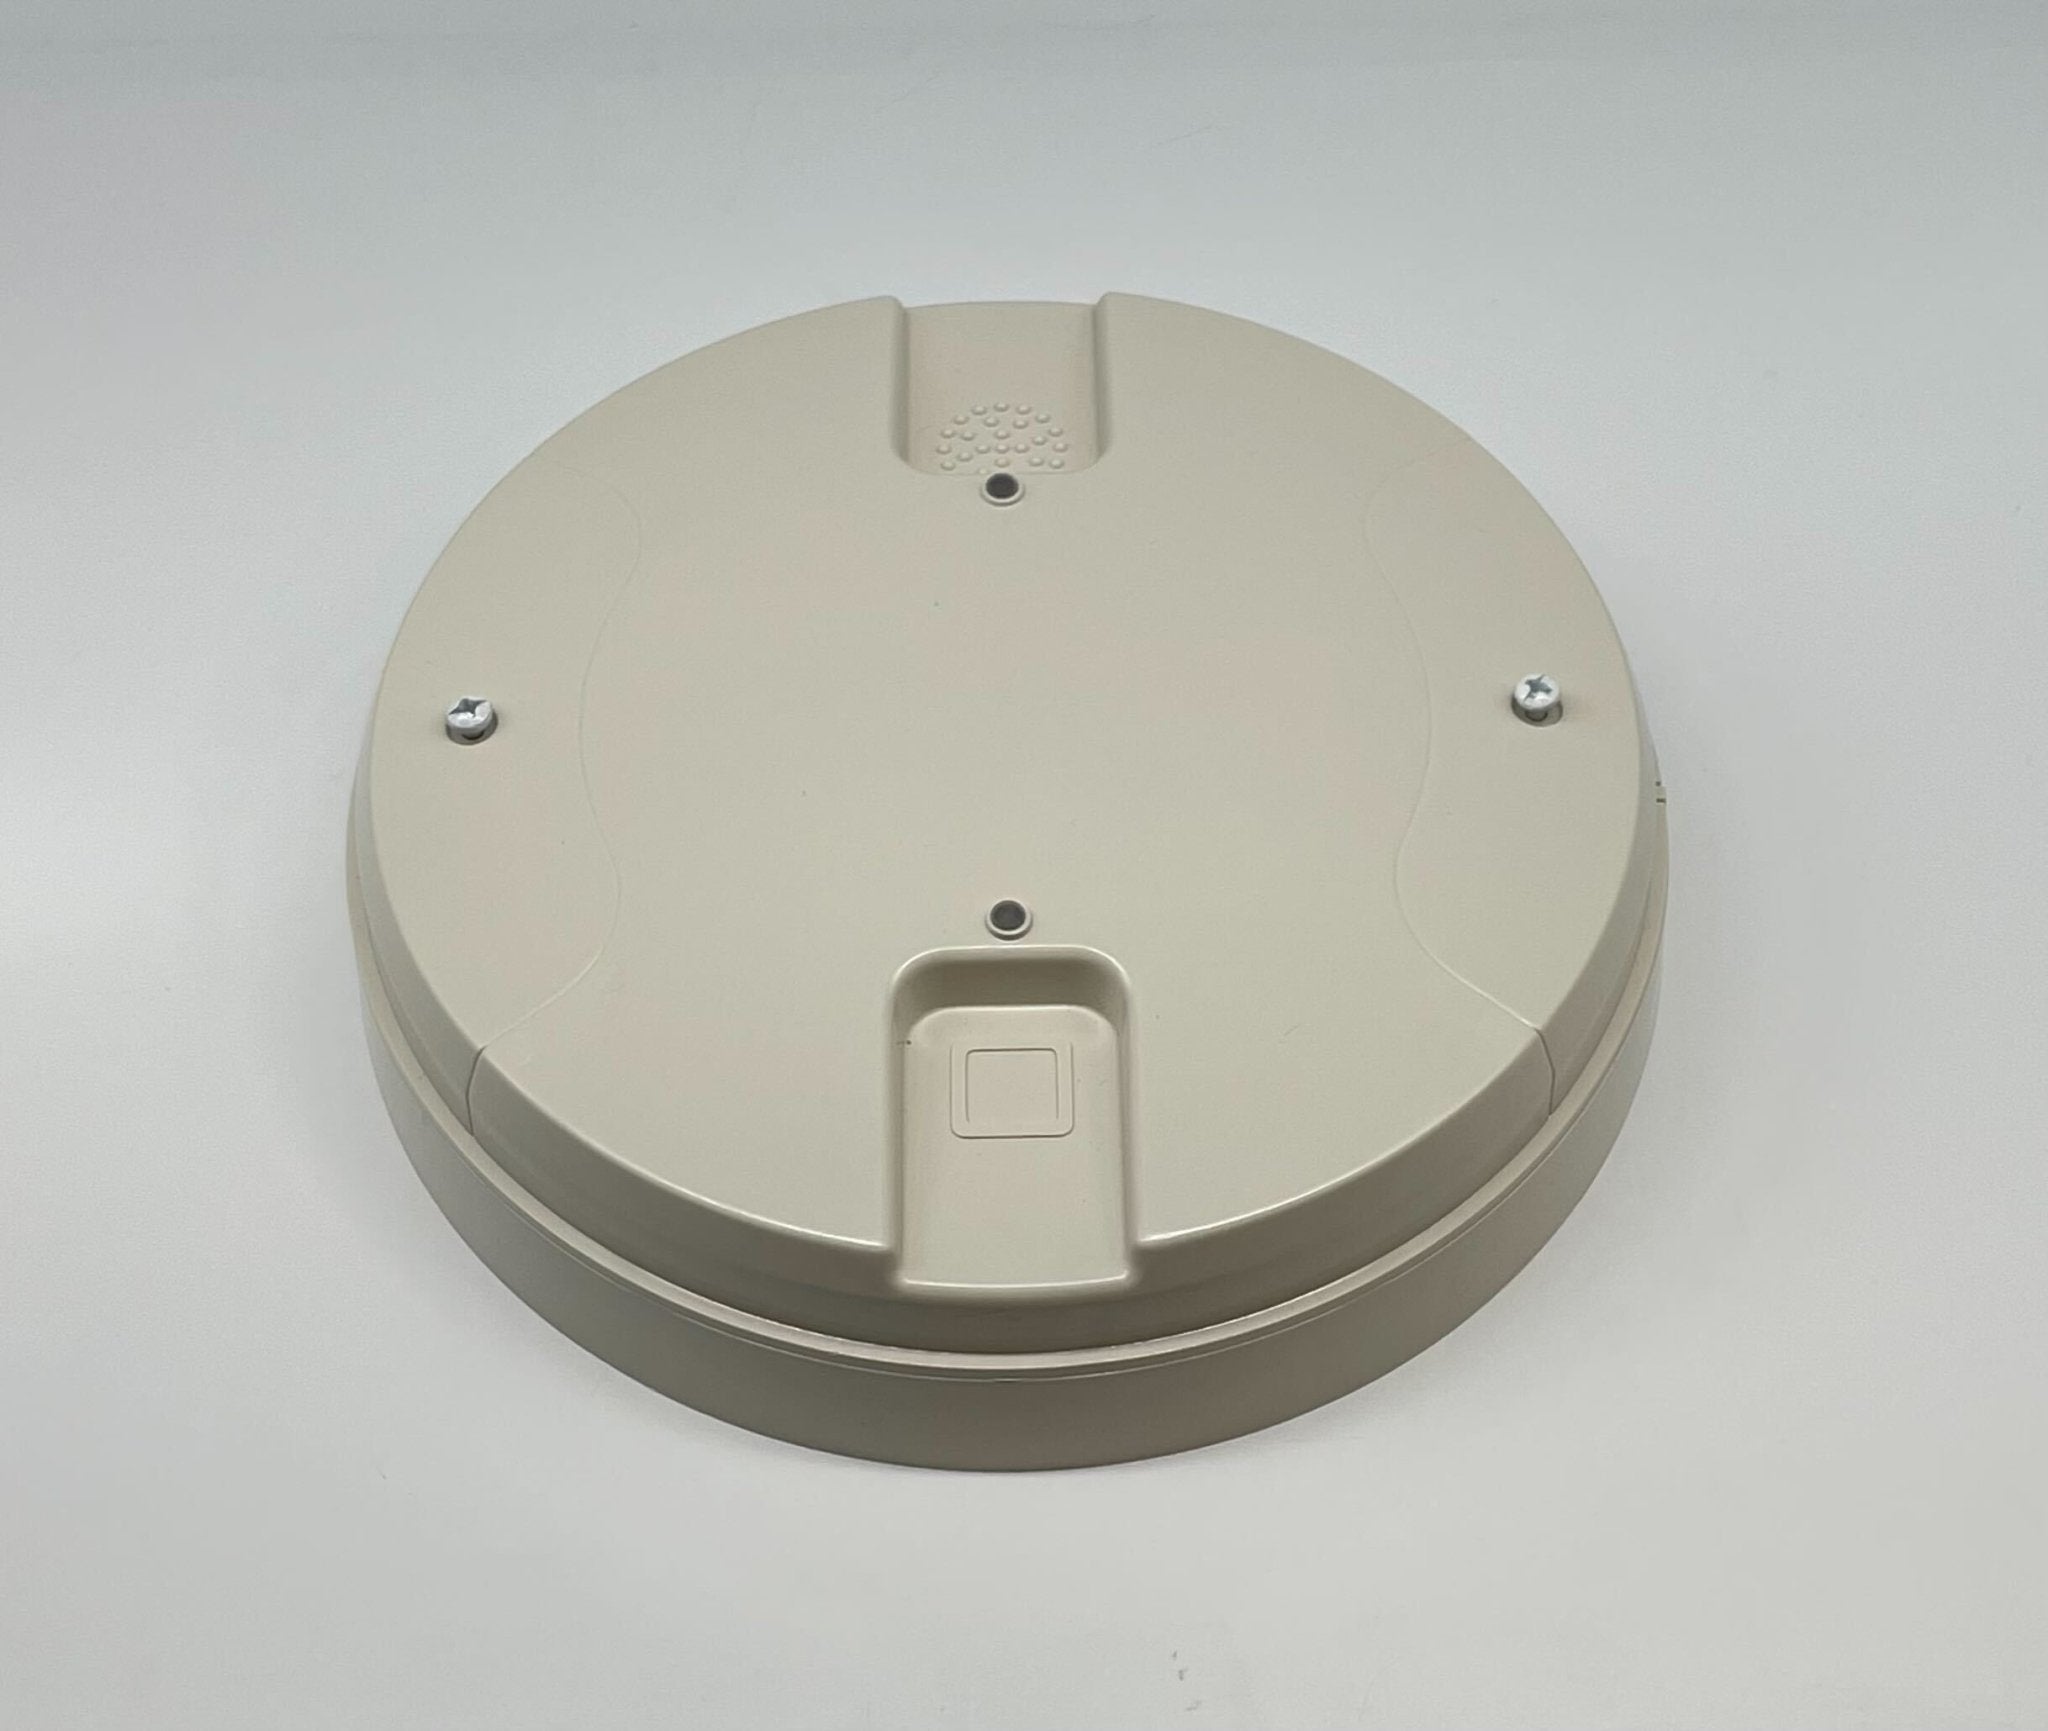 Silent Knight WSK-WGI - The Fire Alarm Supplier